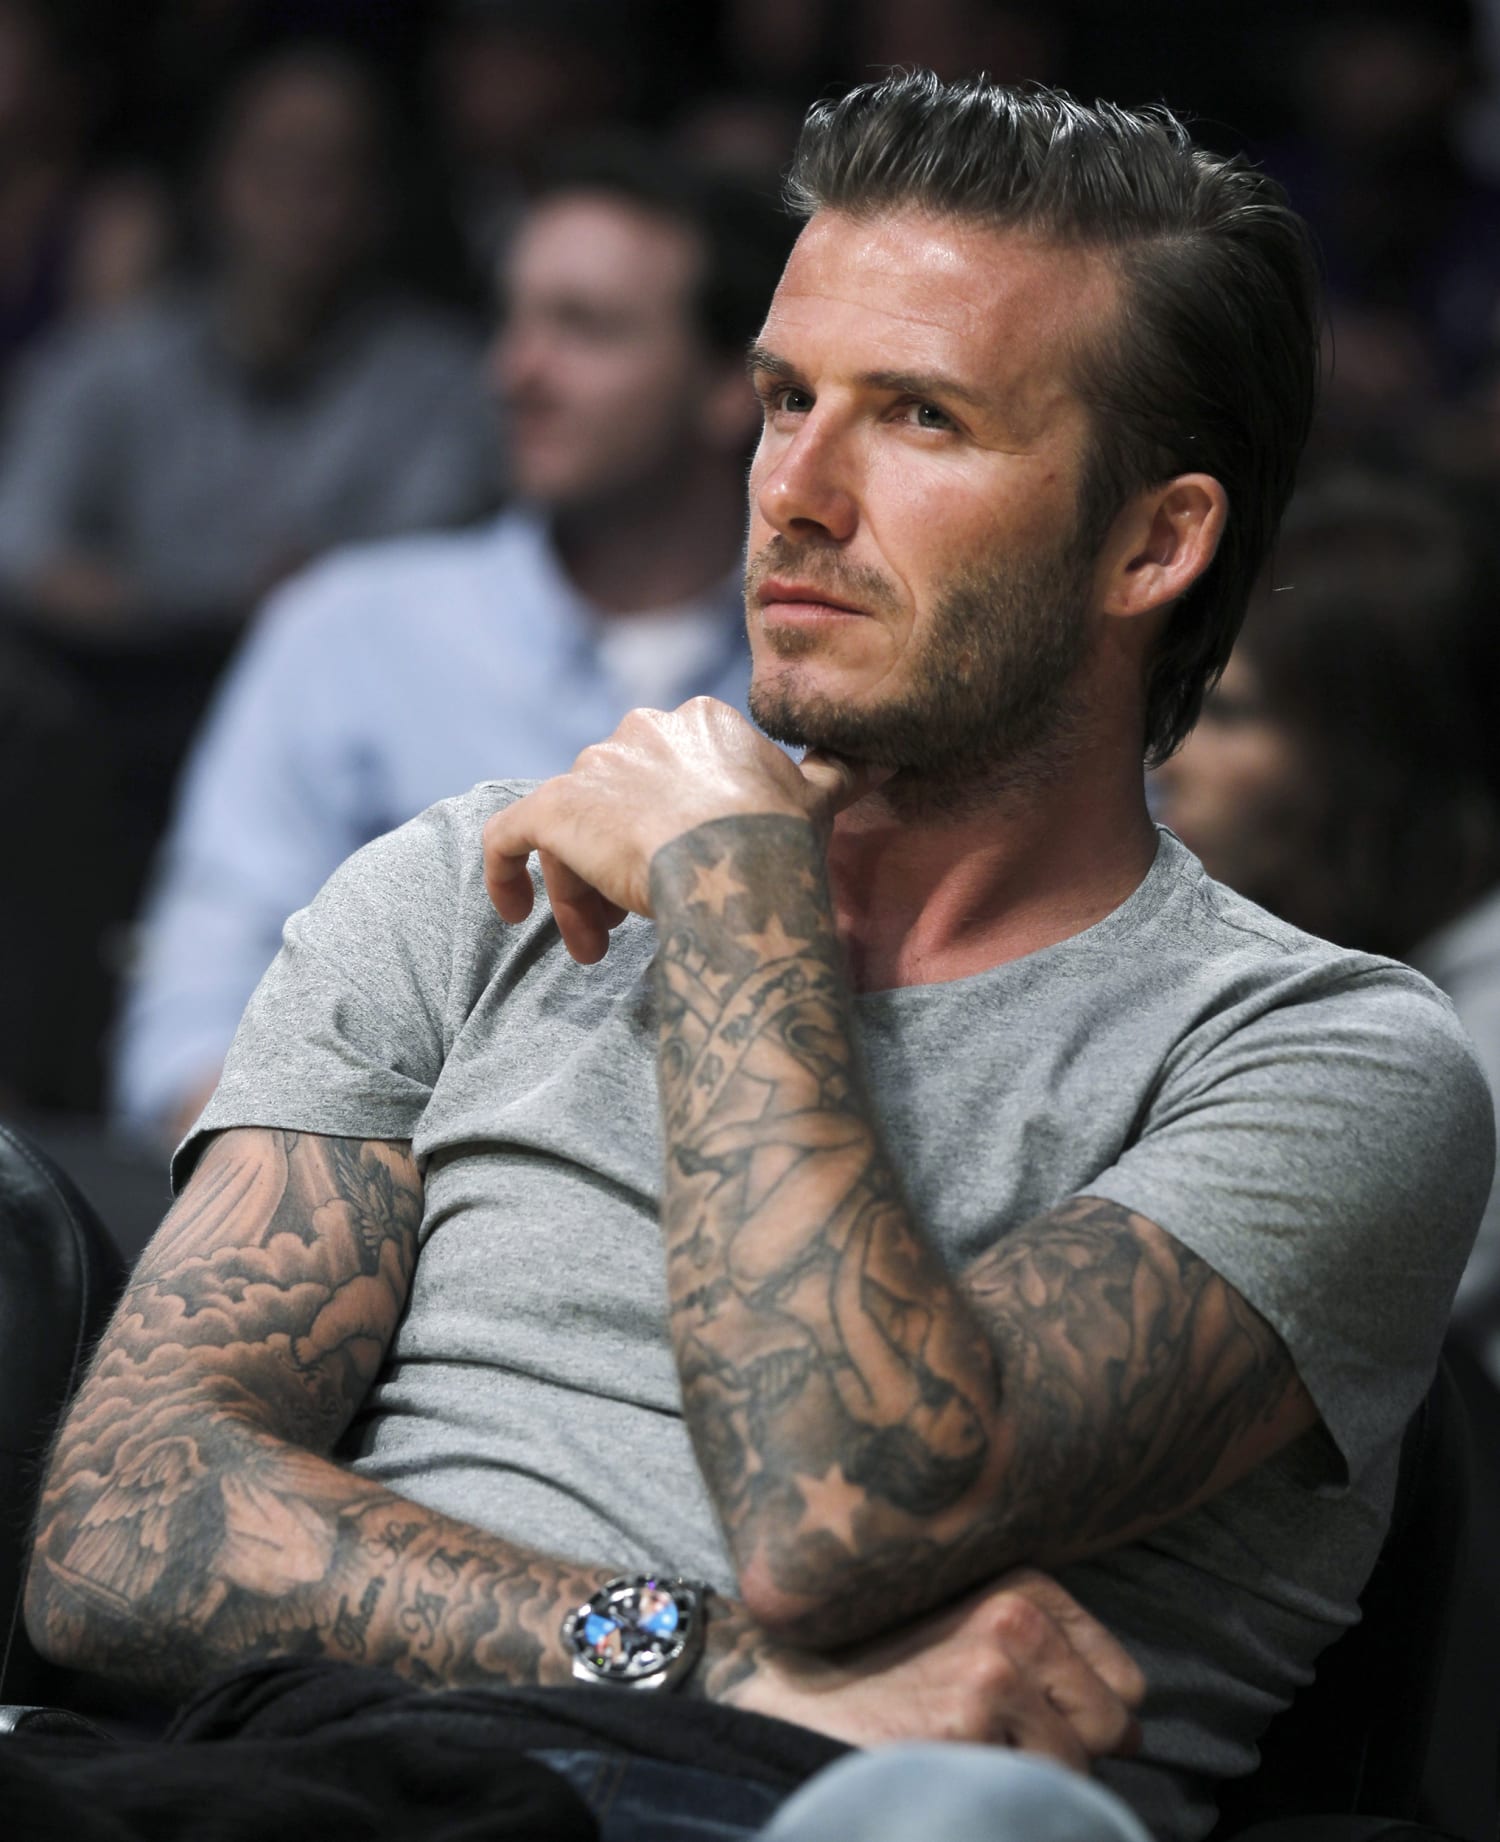 David Beckham shows off new tattoo captioned 'The end' in Snapchat video |  Daily Mail Online